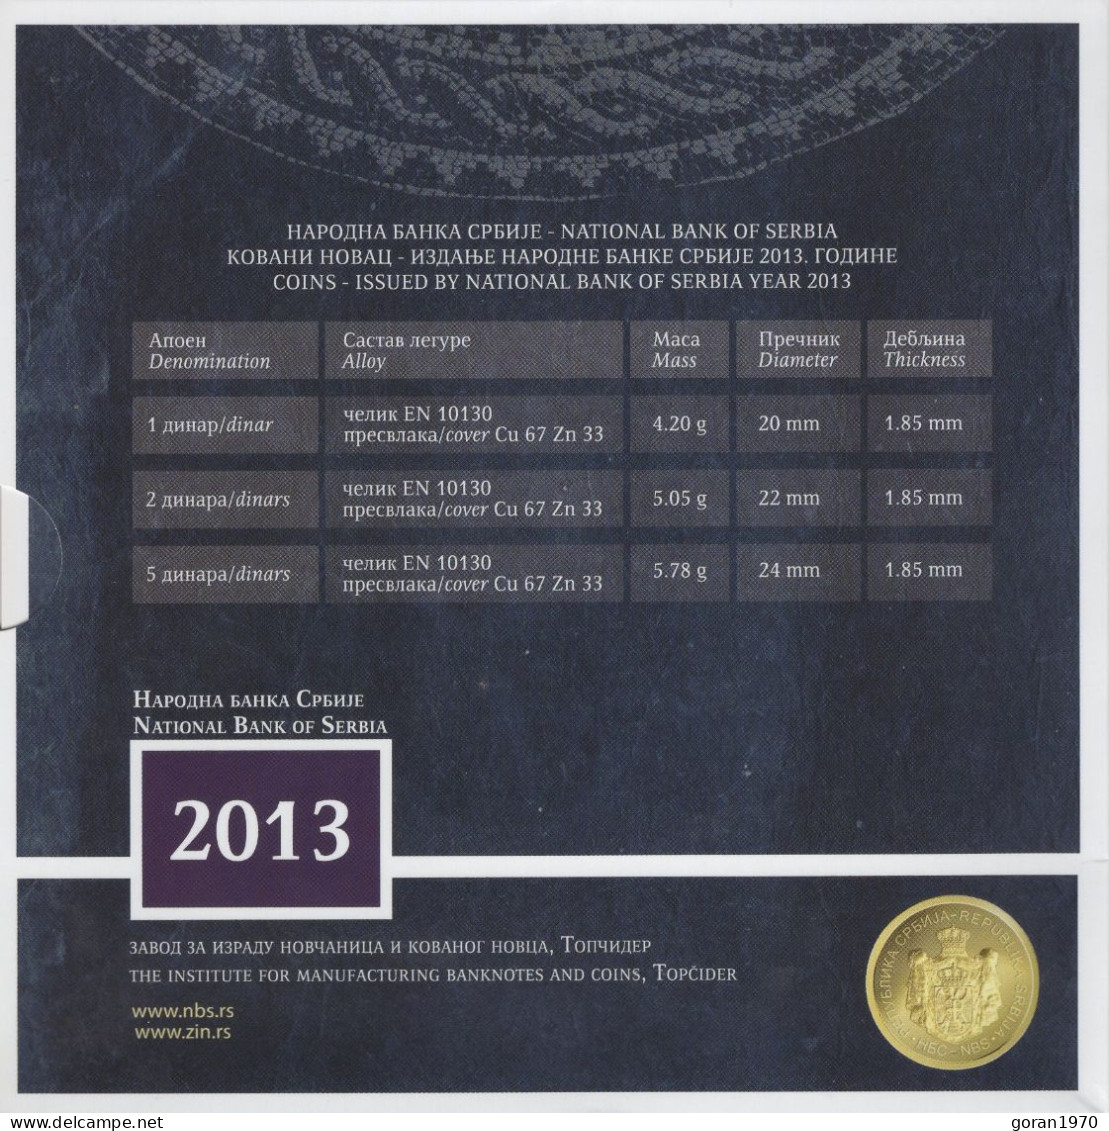 Serbia Coins Set 2013. UNC, NBS, 17 Centuries Of The Edict Of Milan 313-2013 - Serbia